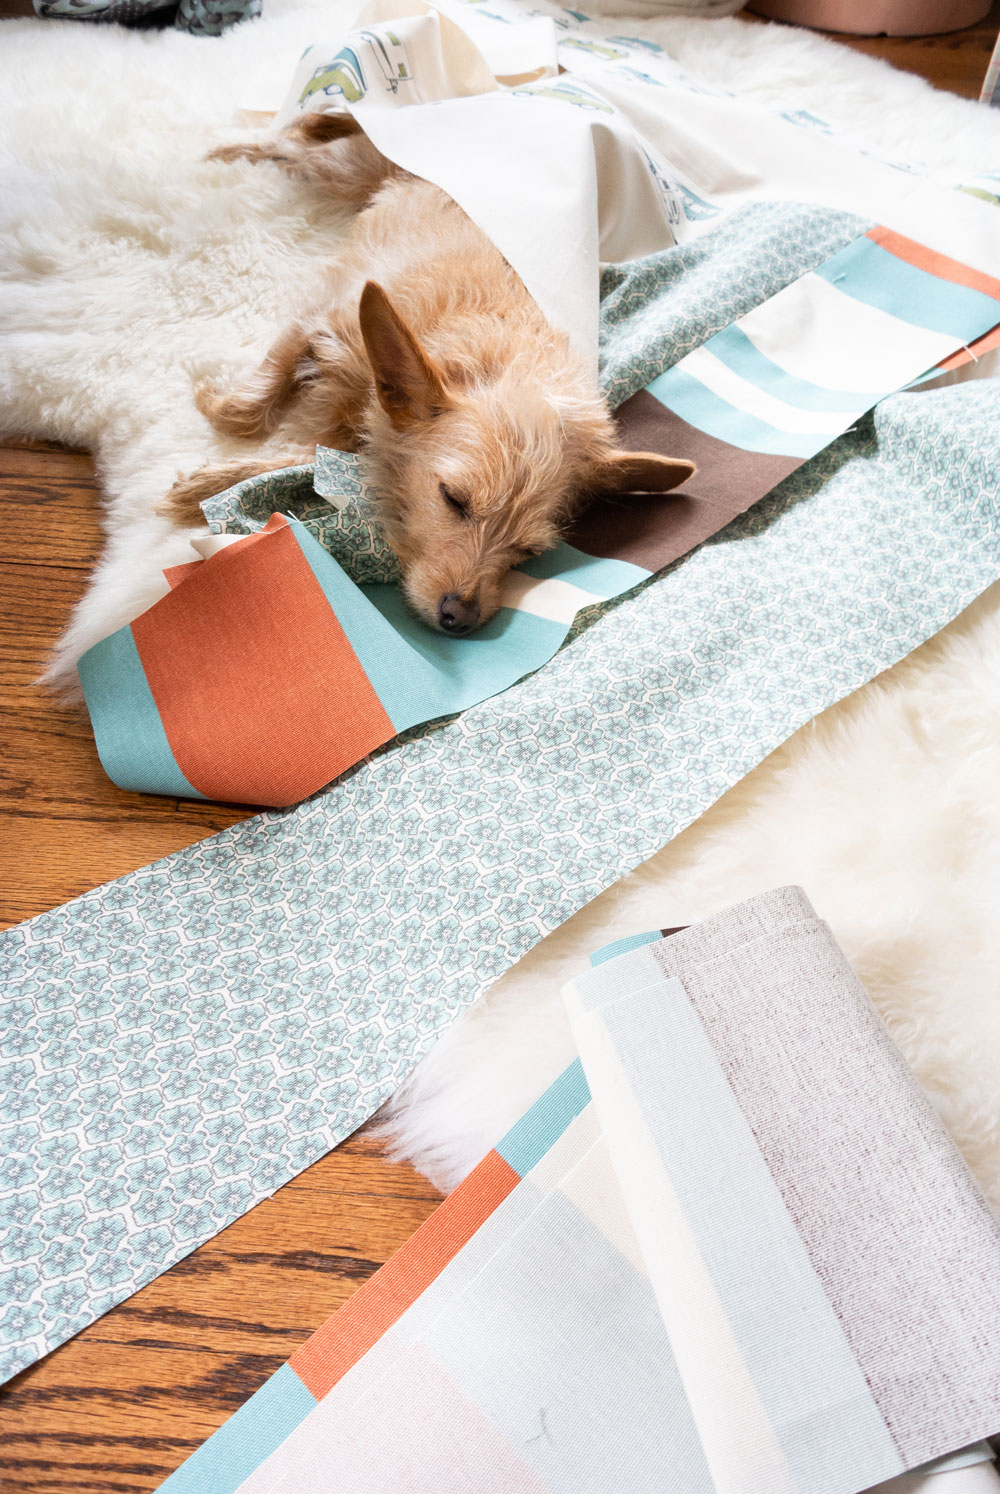 Make an outdoor quilt with canvas!